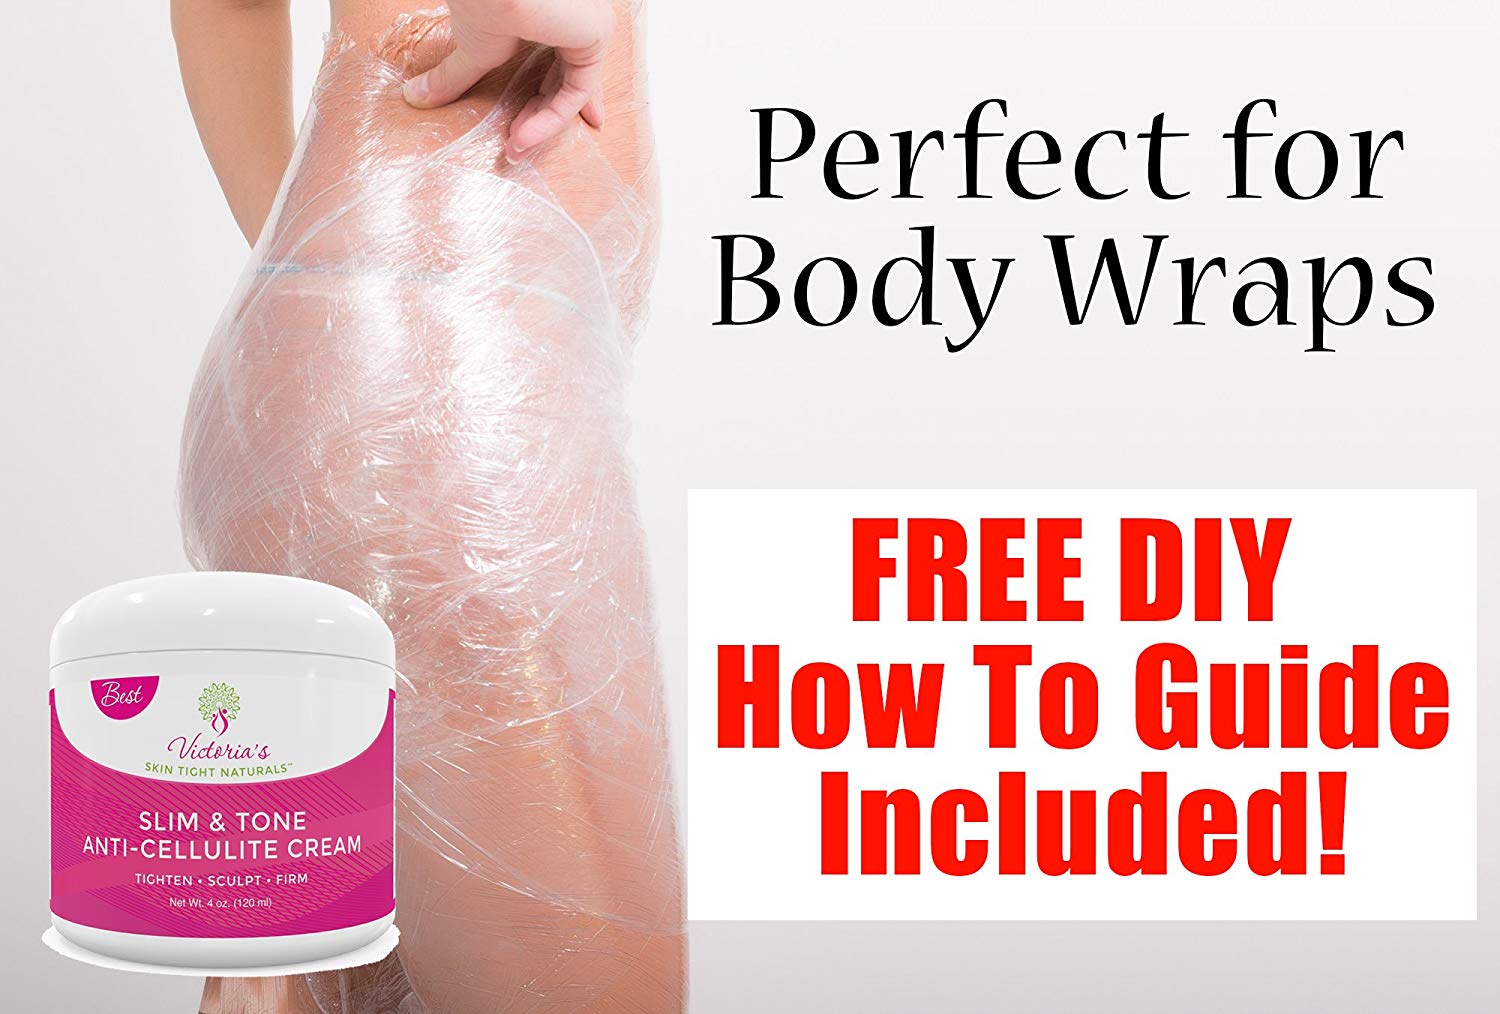 At Last, The Secret To Getting Rid of Cellulite Revealed